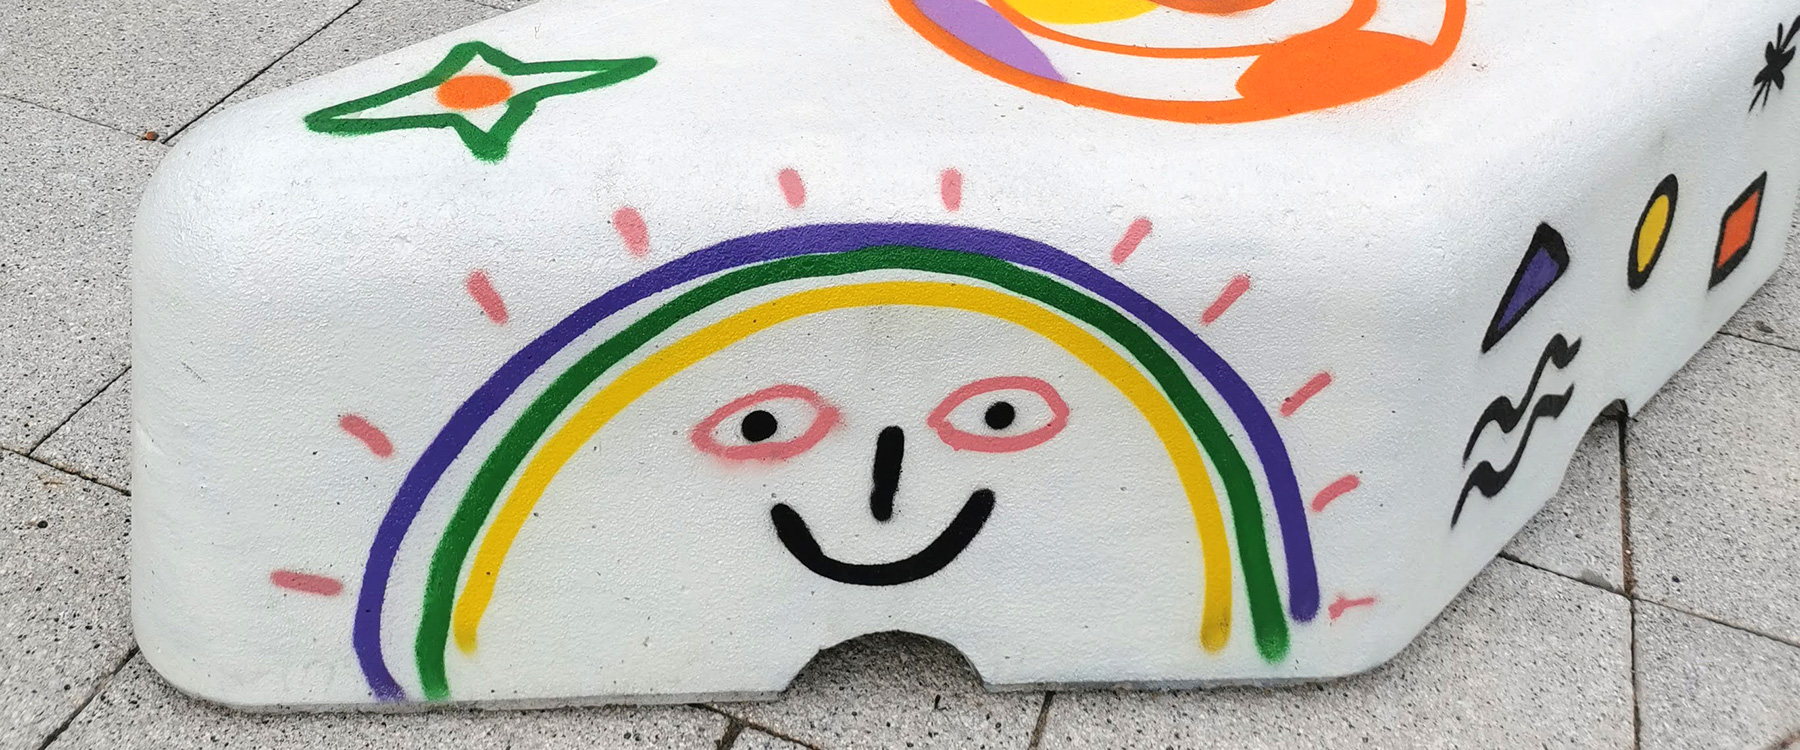 A colourfully-painted bollard has a planet with a smiling face